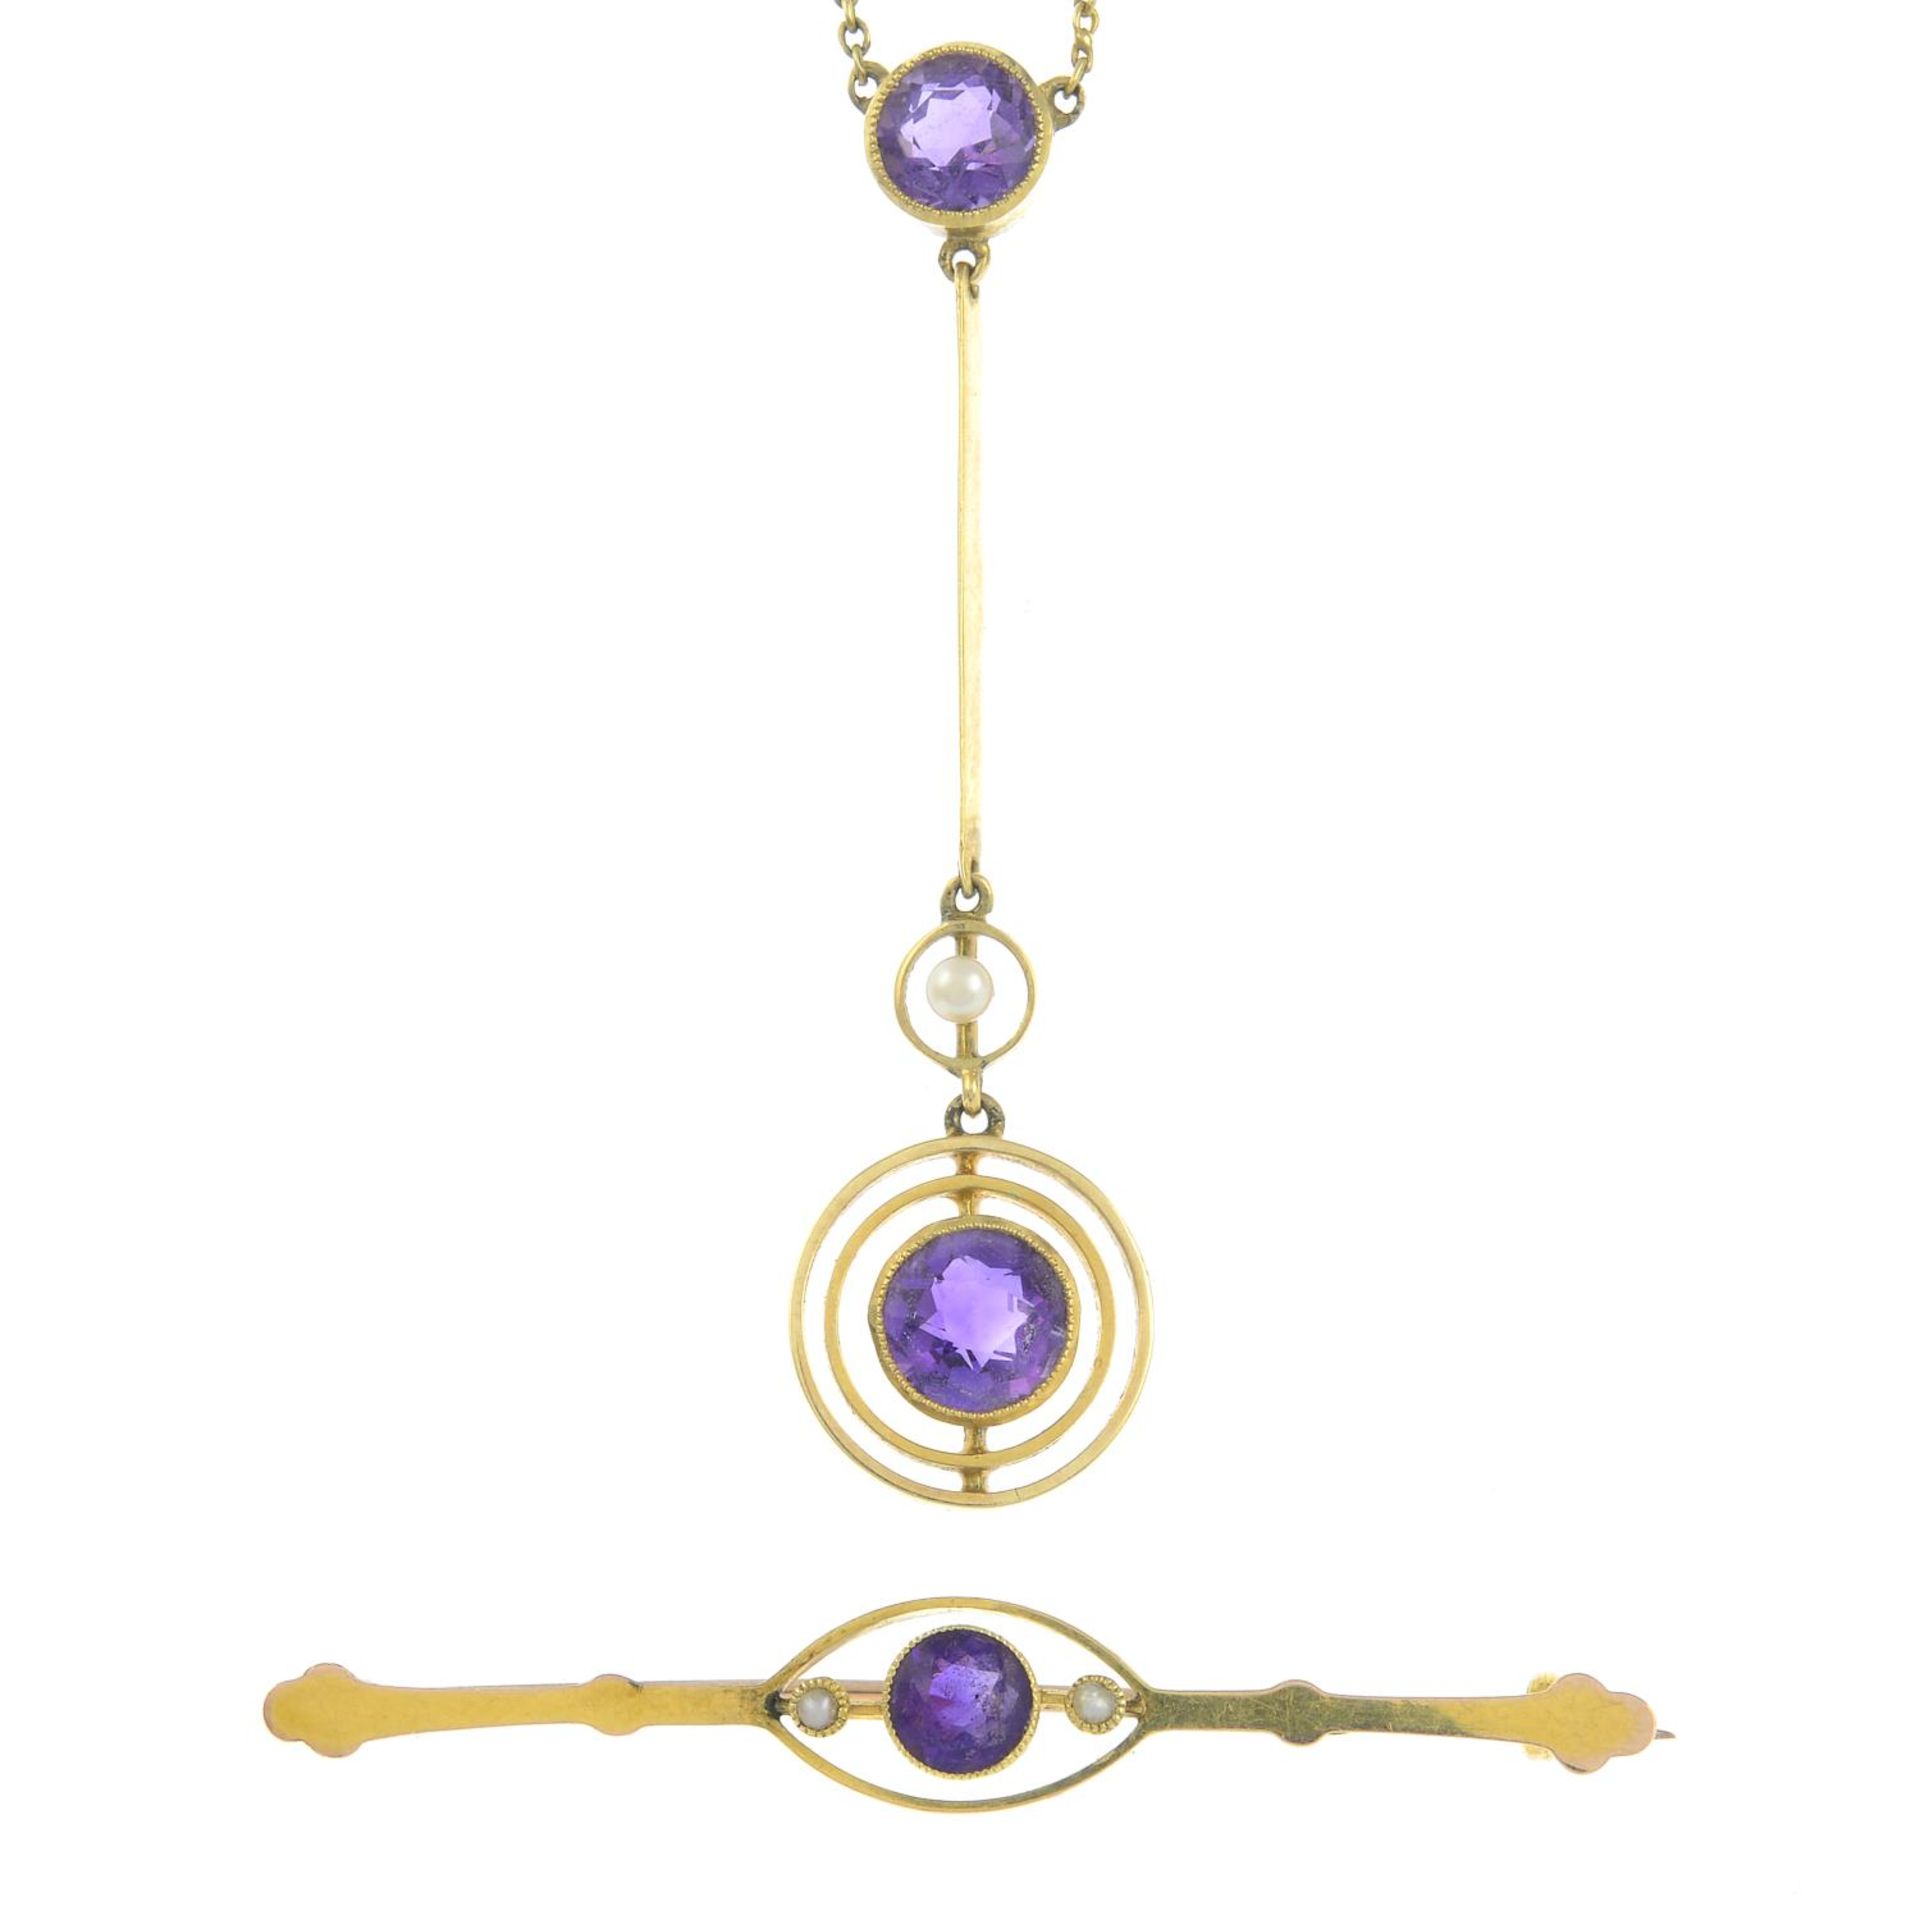 Early 20th century 15ct gold amethyst and split pearl pendant necklace,